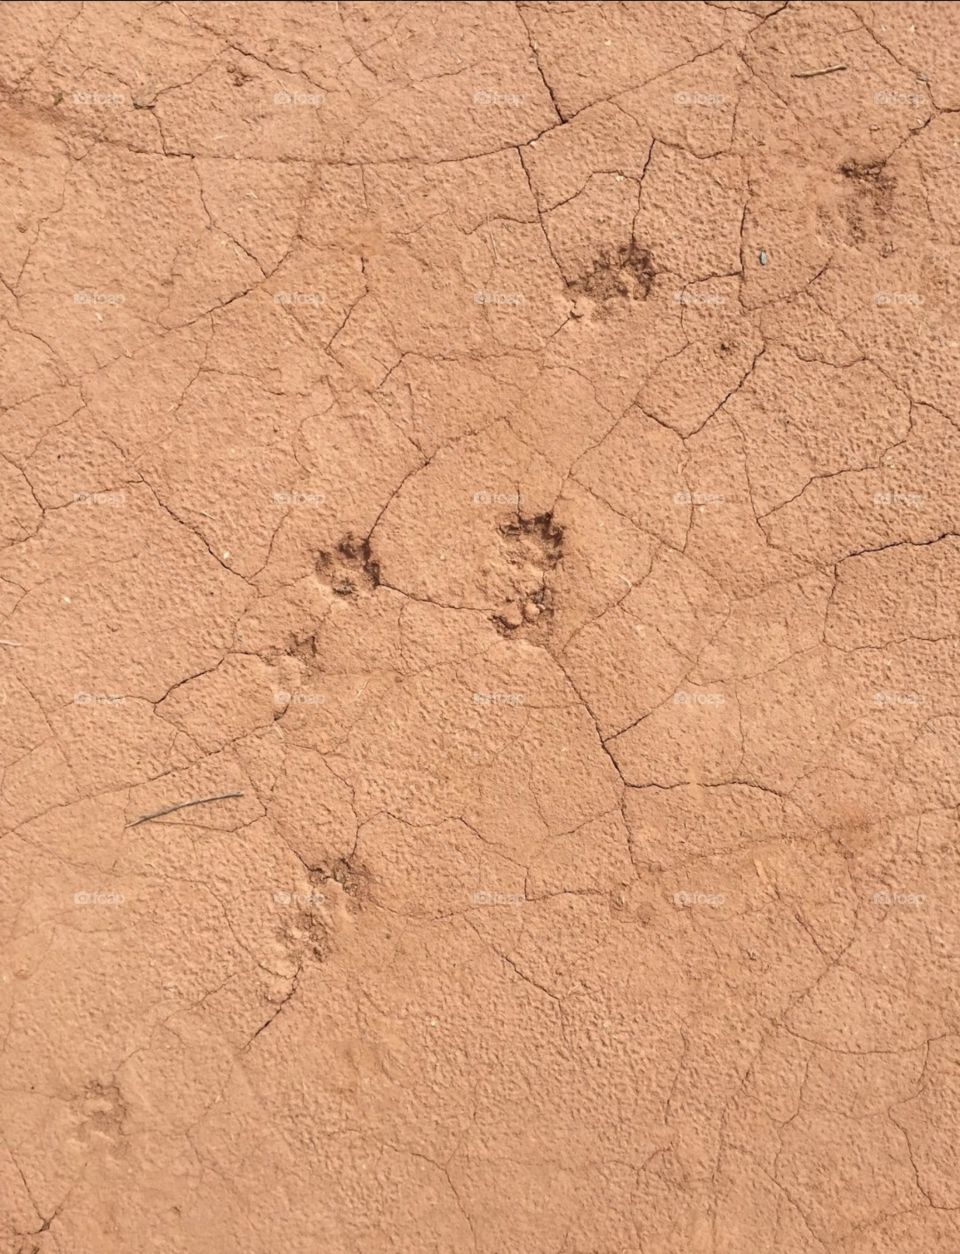 Paws in the desert